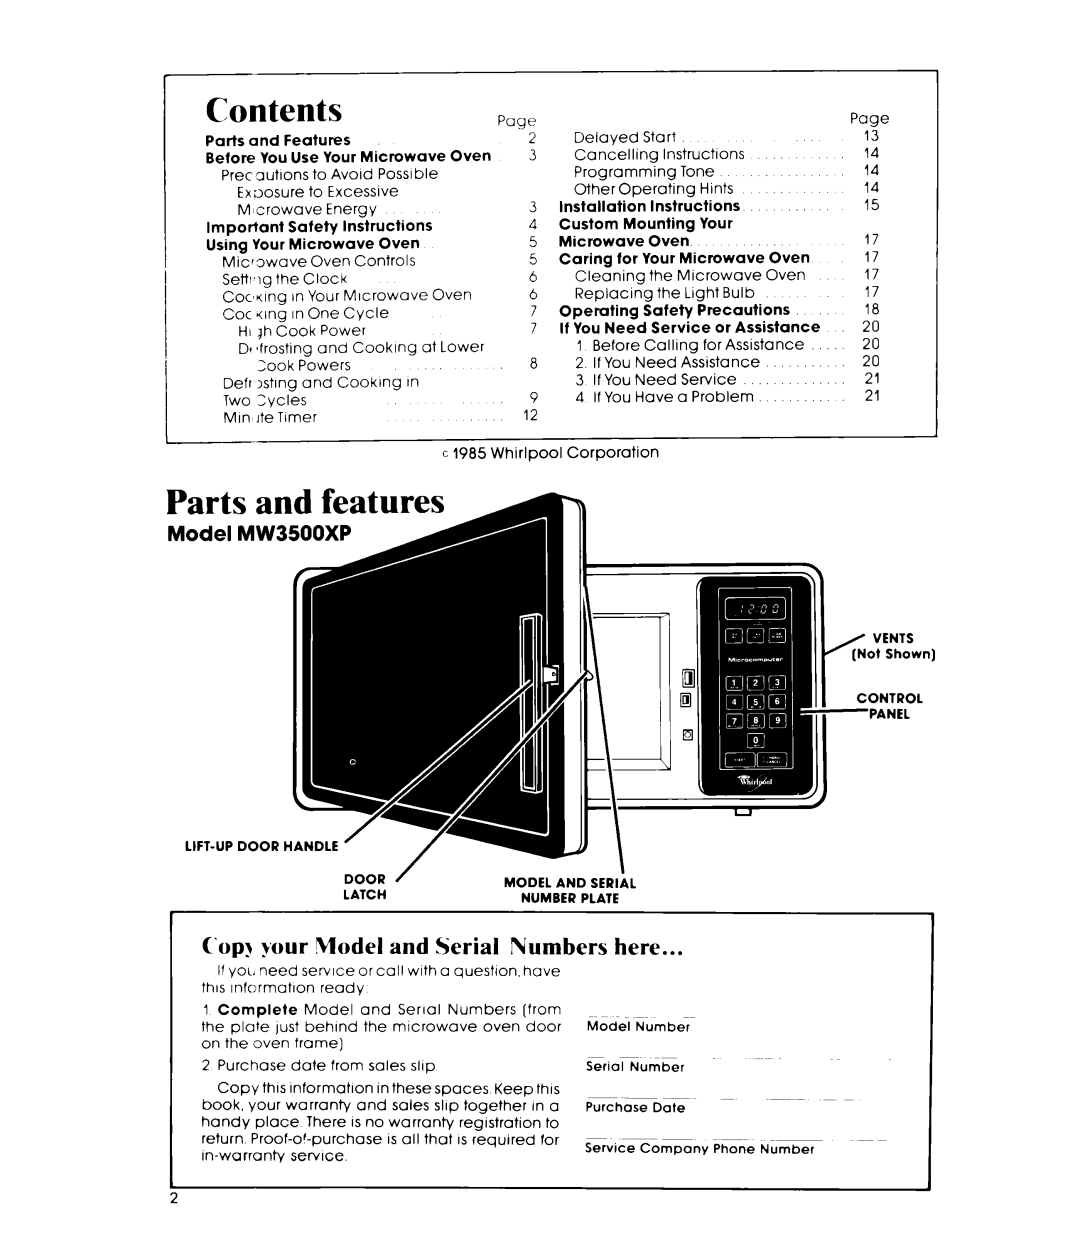 Whirlpool 252, Microwave Oven manual Contents, Parts and features, Model MW3500XP, Copy your Vodel and Serial Numbers here 